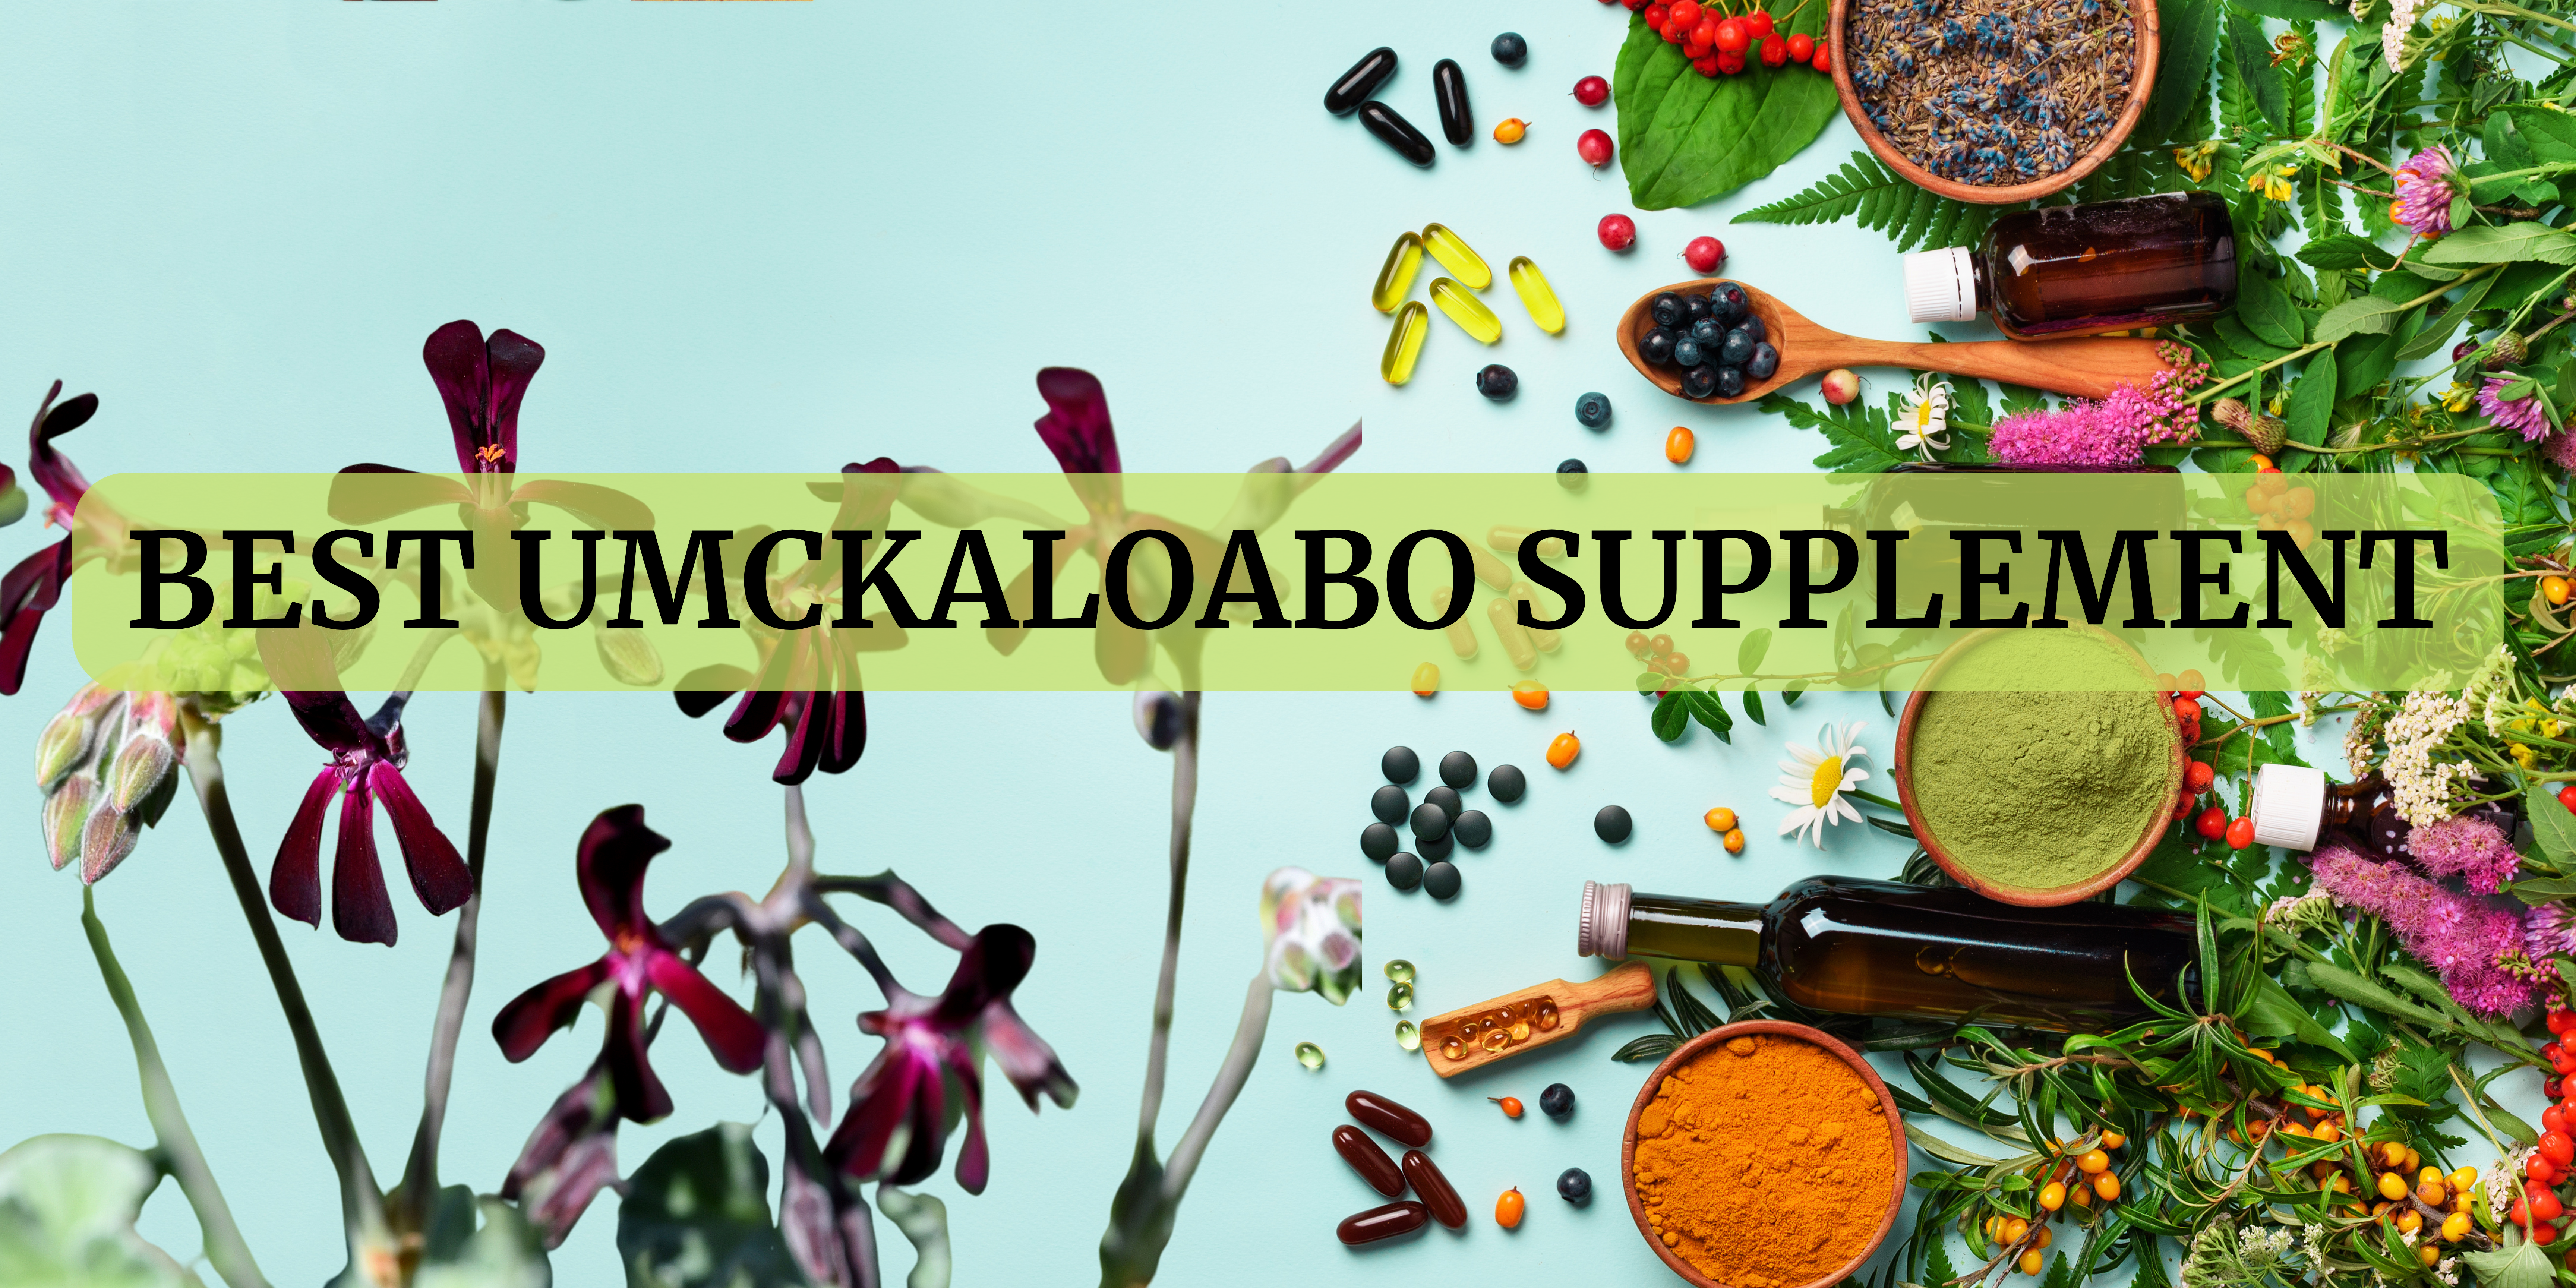 Umckaloabo Supplements in the World